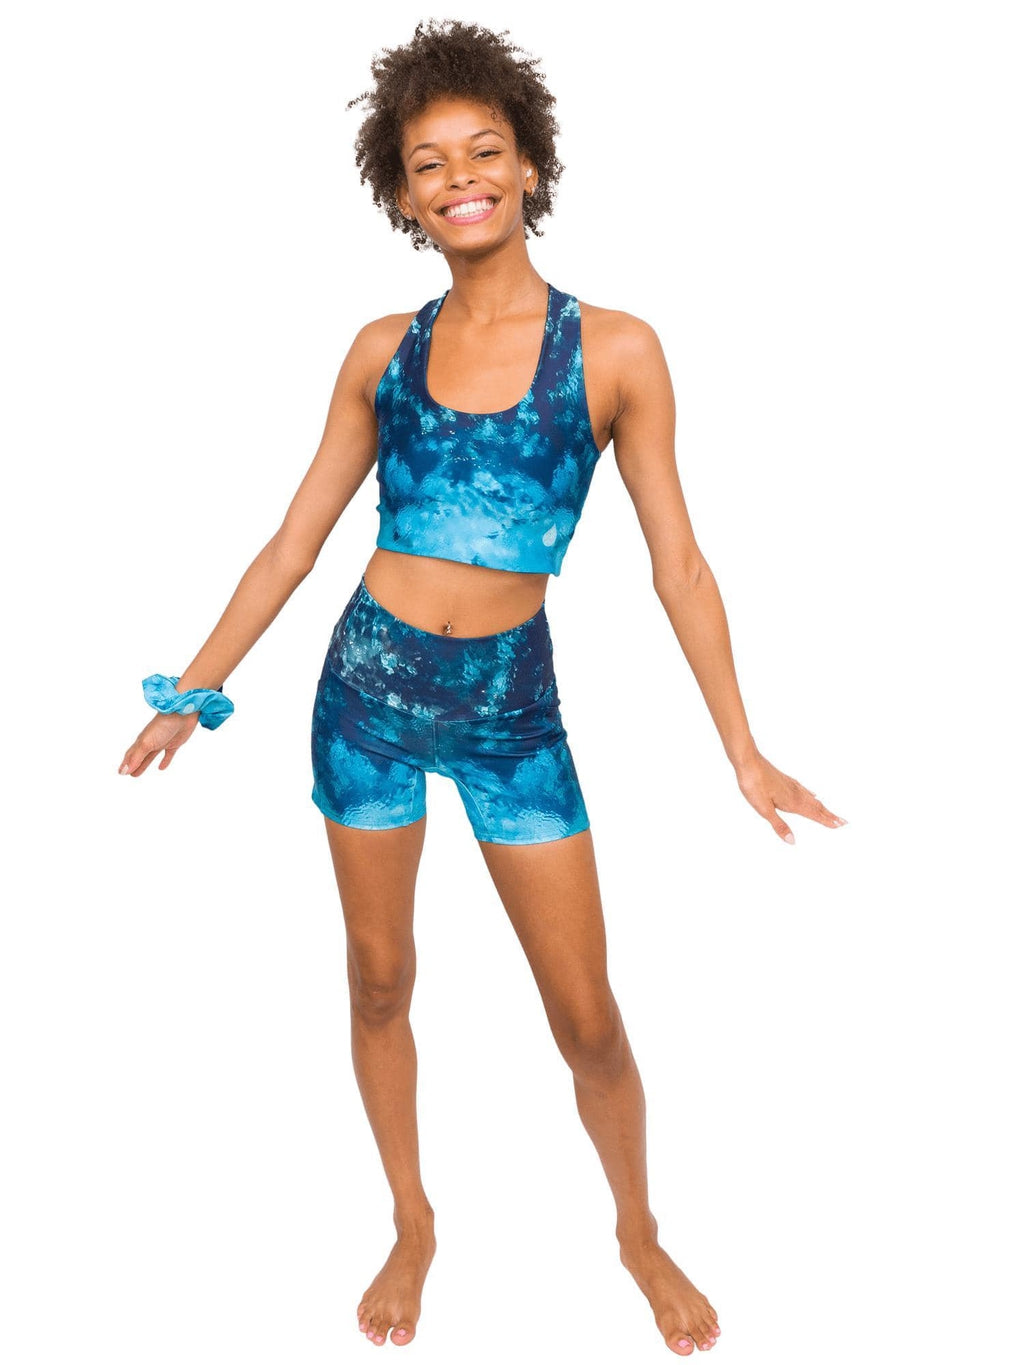 Model: Syriah is a sea turtle conservation biologist. She is 5&#39;7&quot;, 111 lbs and is wearing a size XS short and XS top.